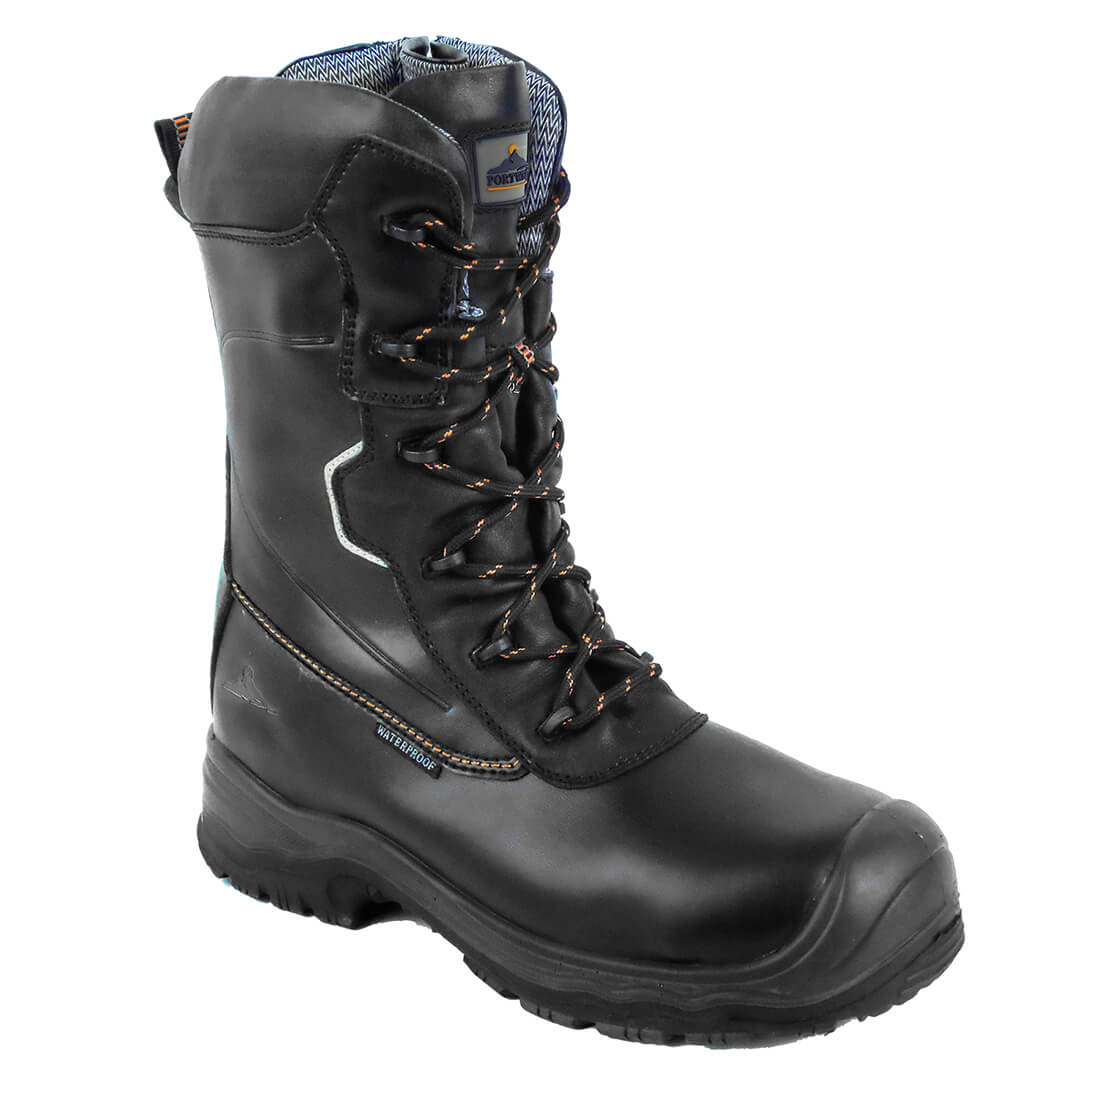 Image of Portwest Mens Compositelite Traction Safety Boots Black Size 12